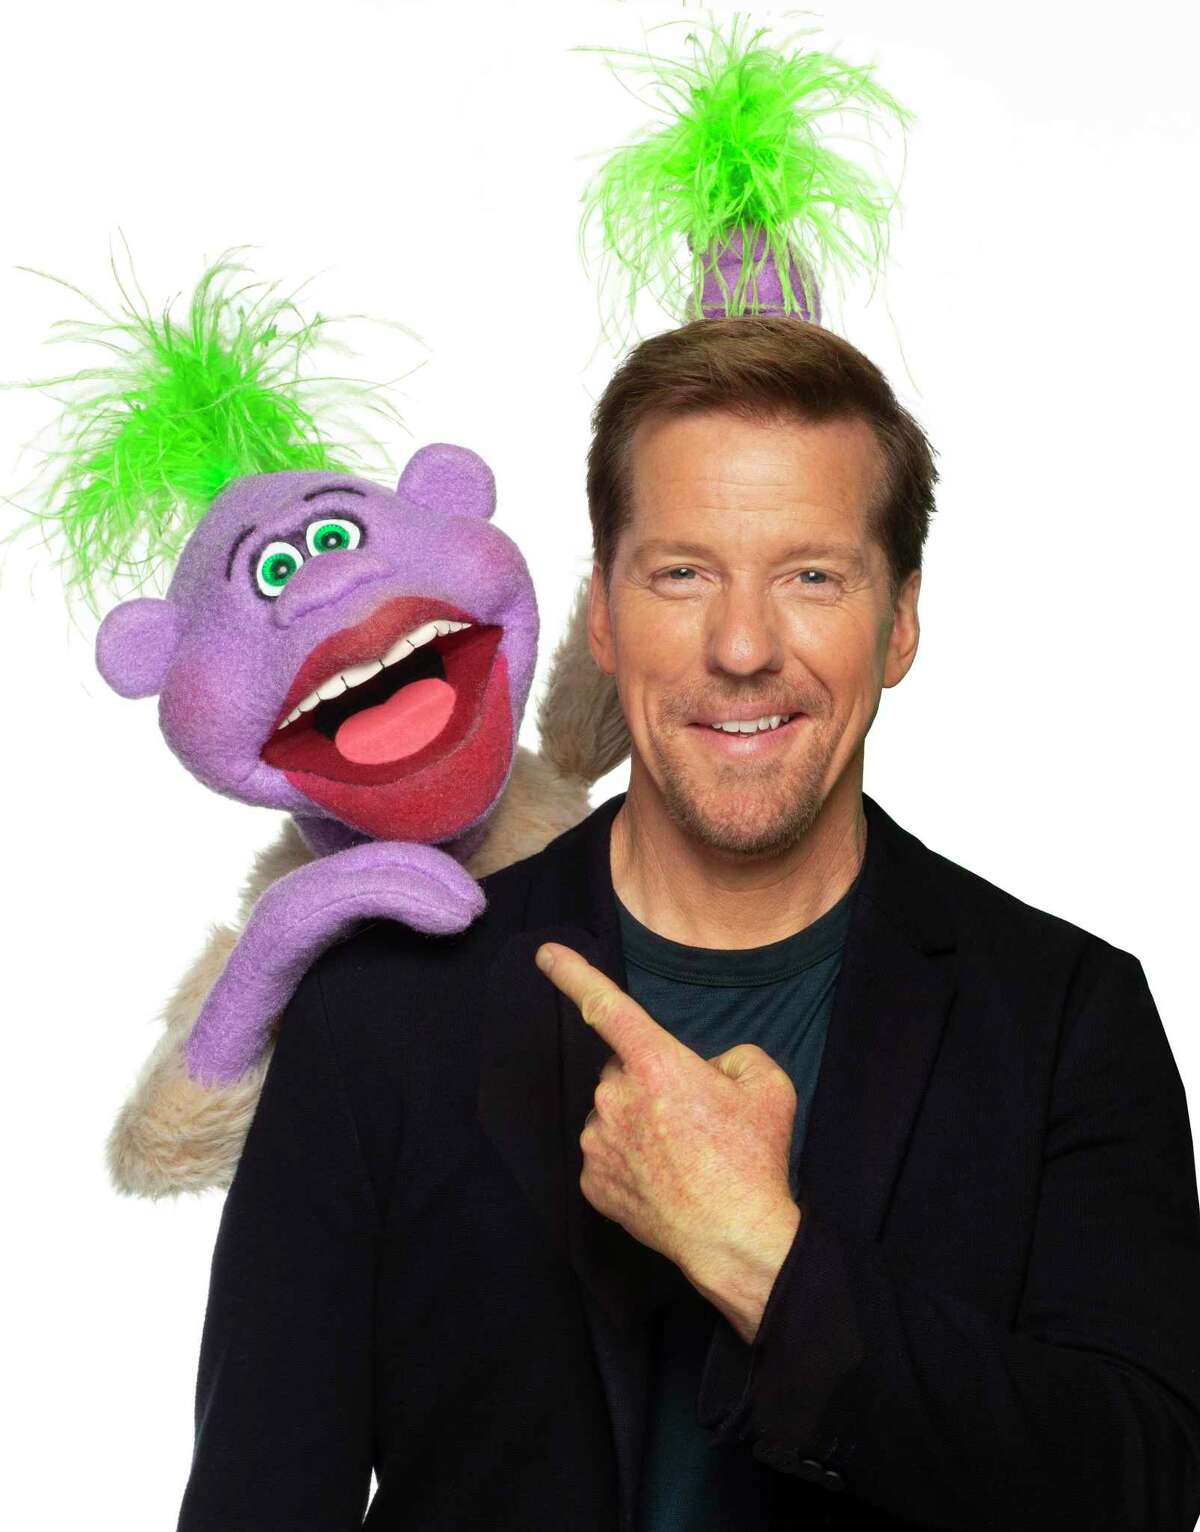 Comedian Jeff Dunham, seen here with Peanut, brings his new international tour, “Jeff Dunham: Seriously!?” to the XL Center in Hartford, Jan. 8.